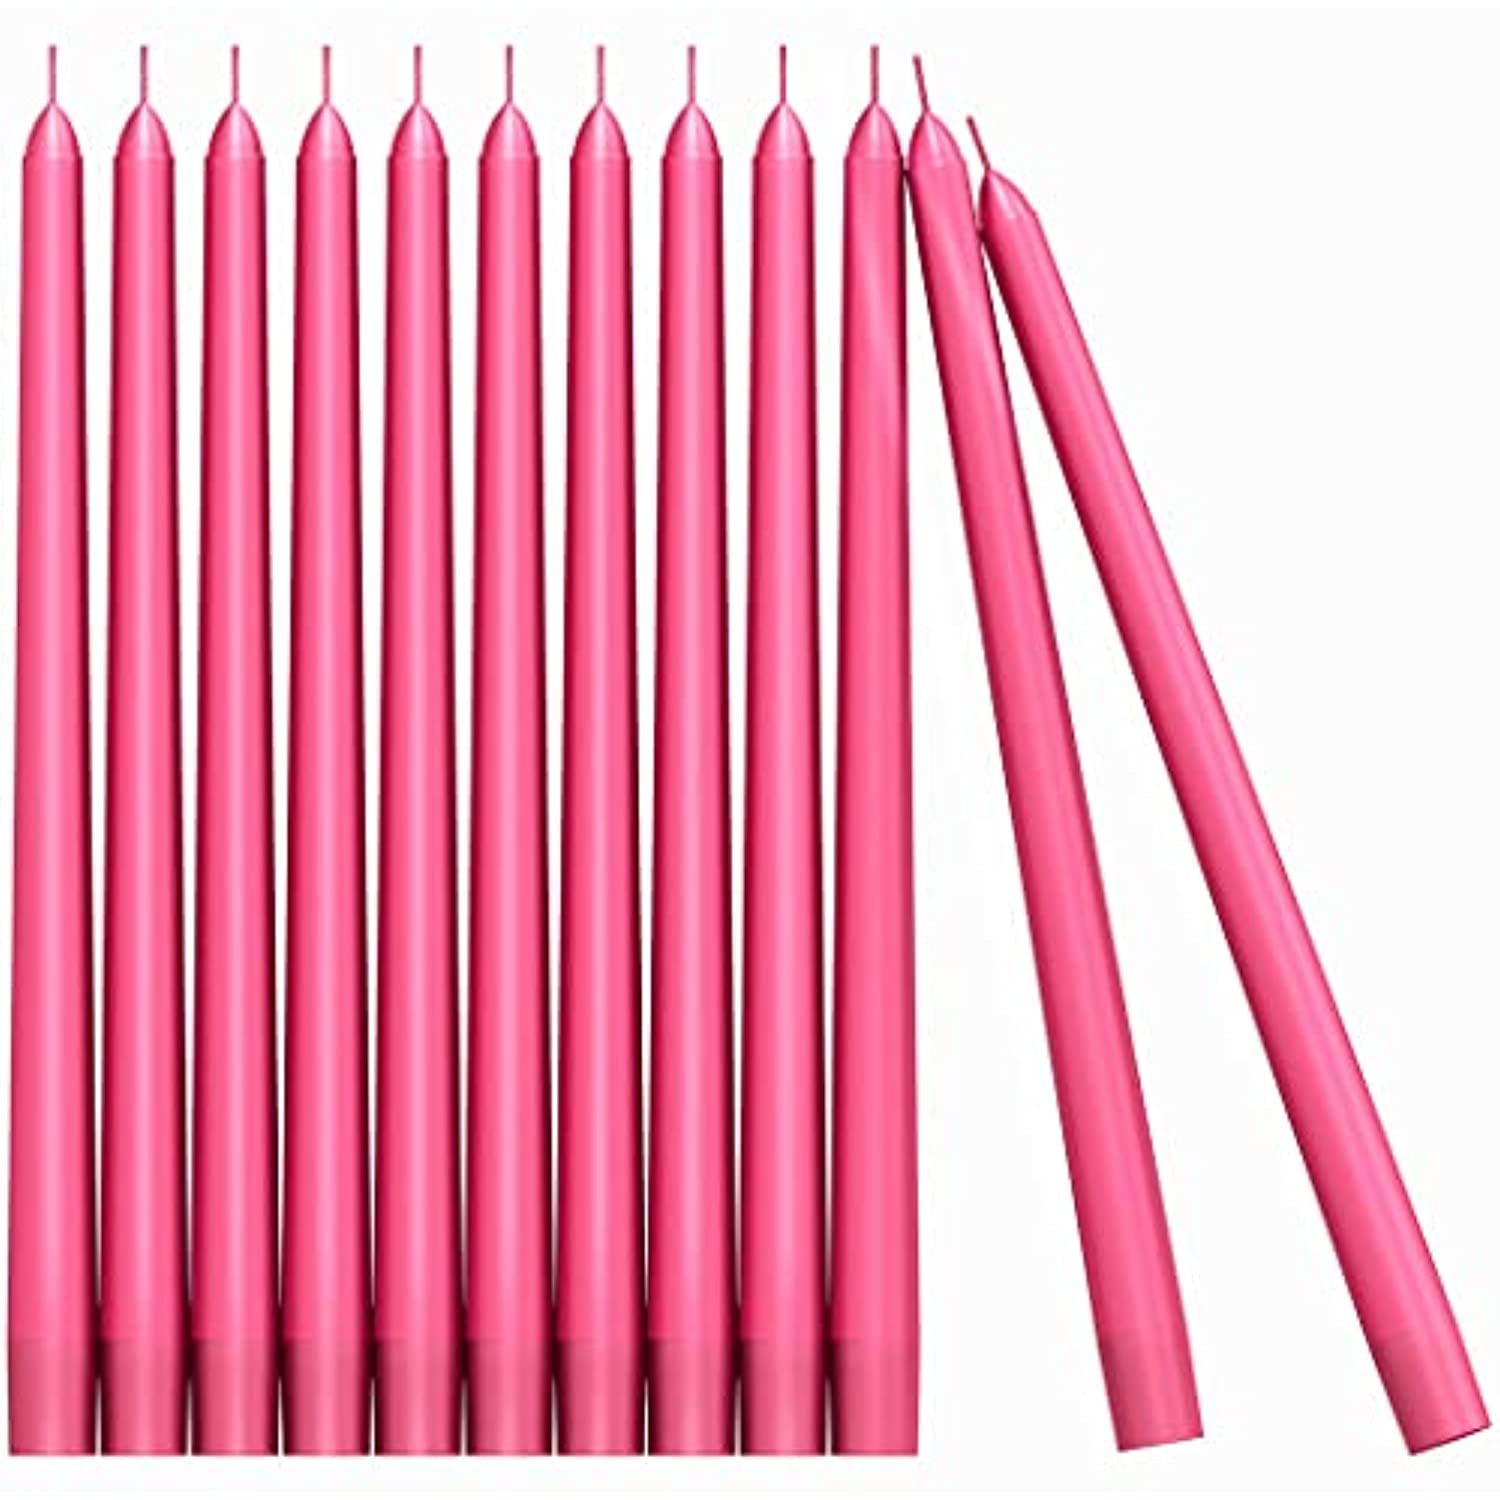 CANDWAX 10 inch Taper Candle Sticks Long Burning Set of 12 - Dripless  Dinner Candles for Table Look Like Matte Metallic Candles and are Ideal for  Any Occasion - Pink Glitter Taper Candles - Walmart.com